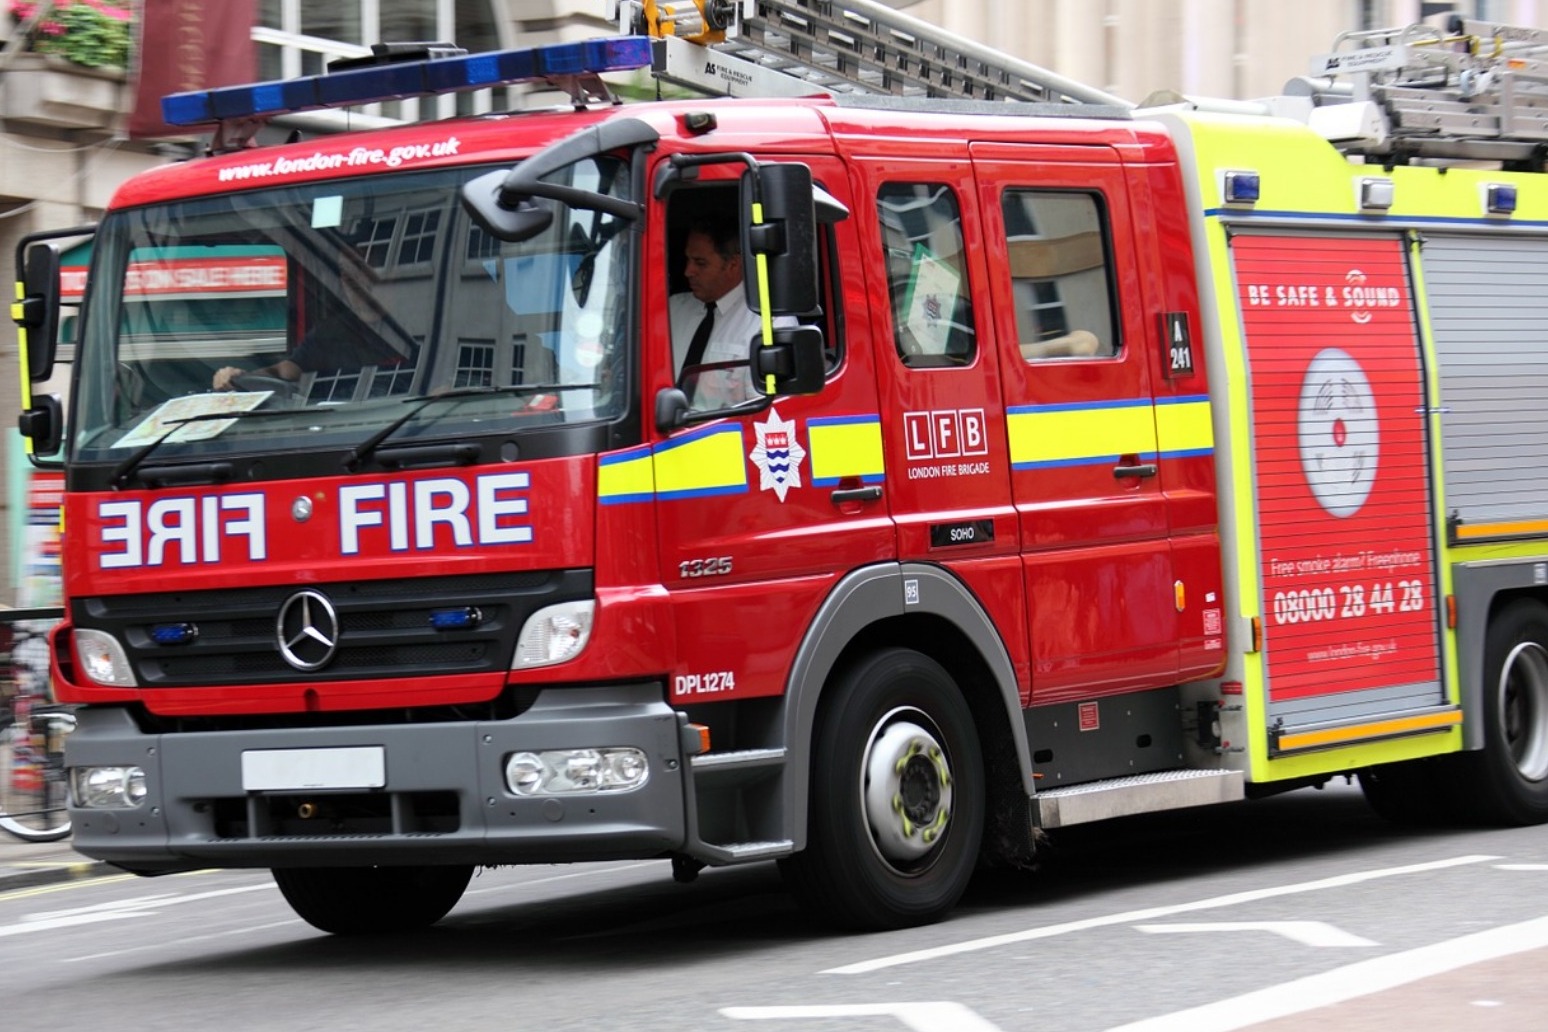 Firefighters tackle blaze at London hotel 